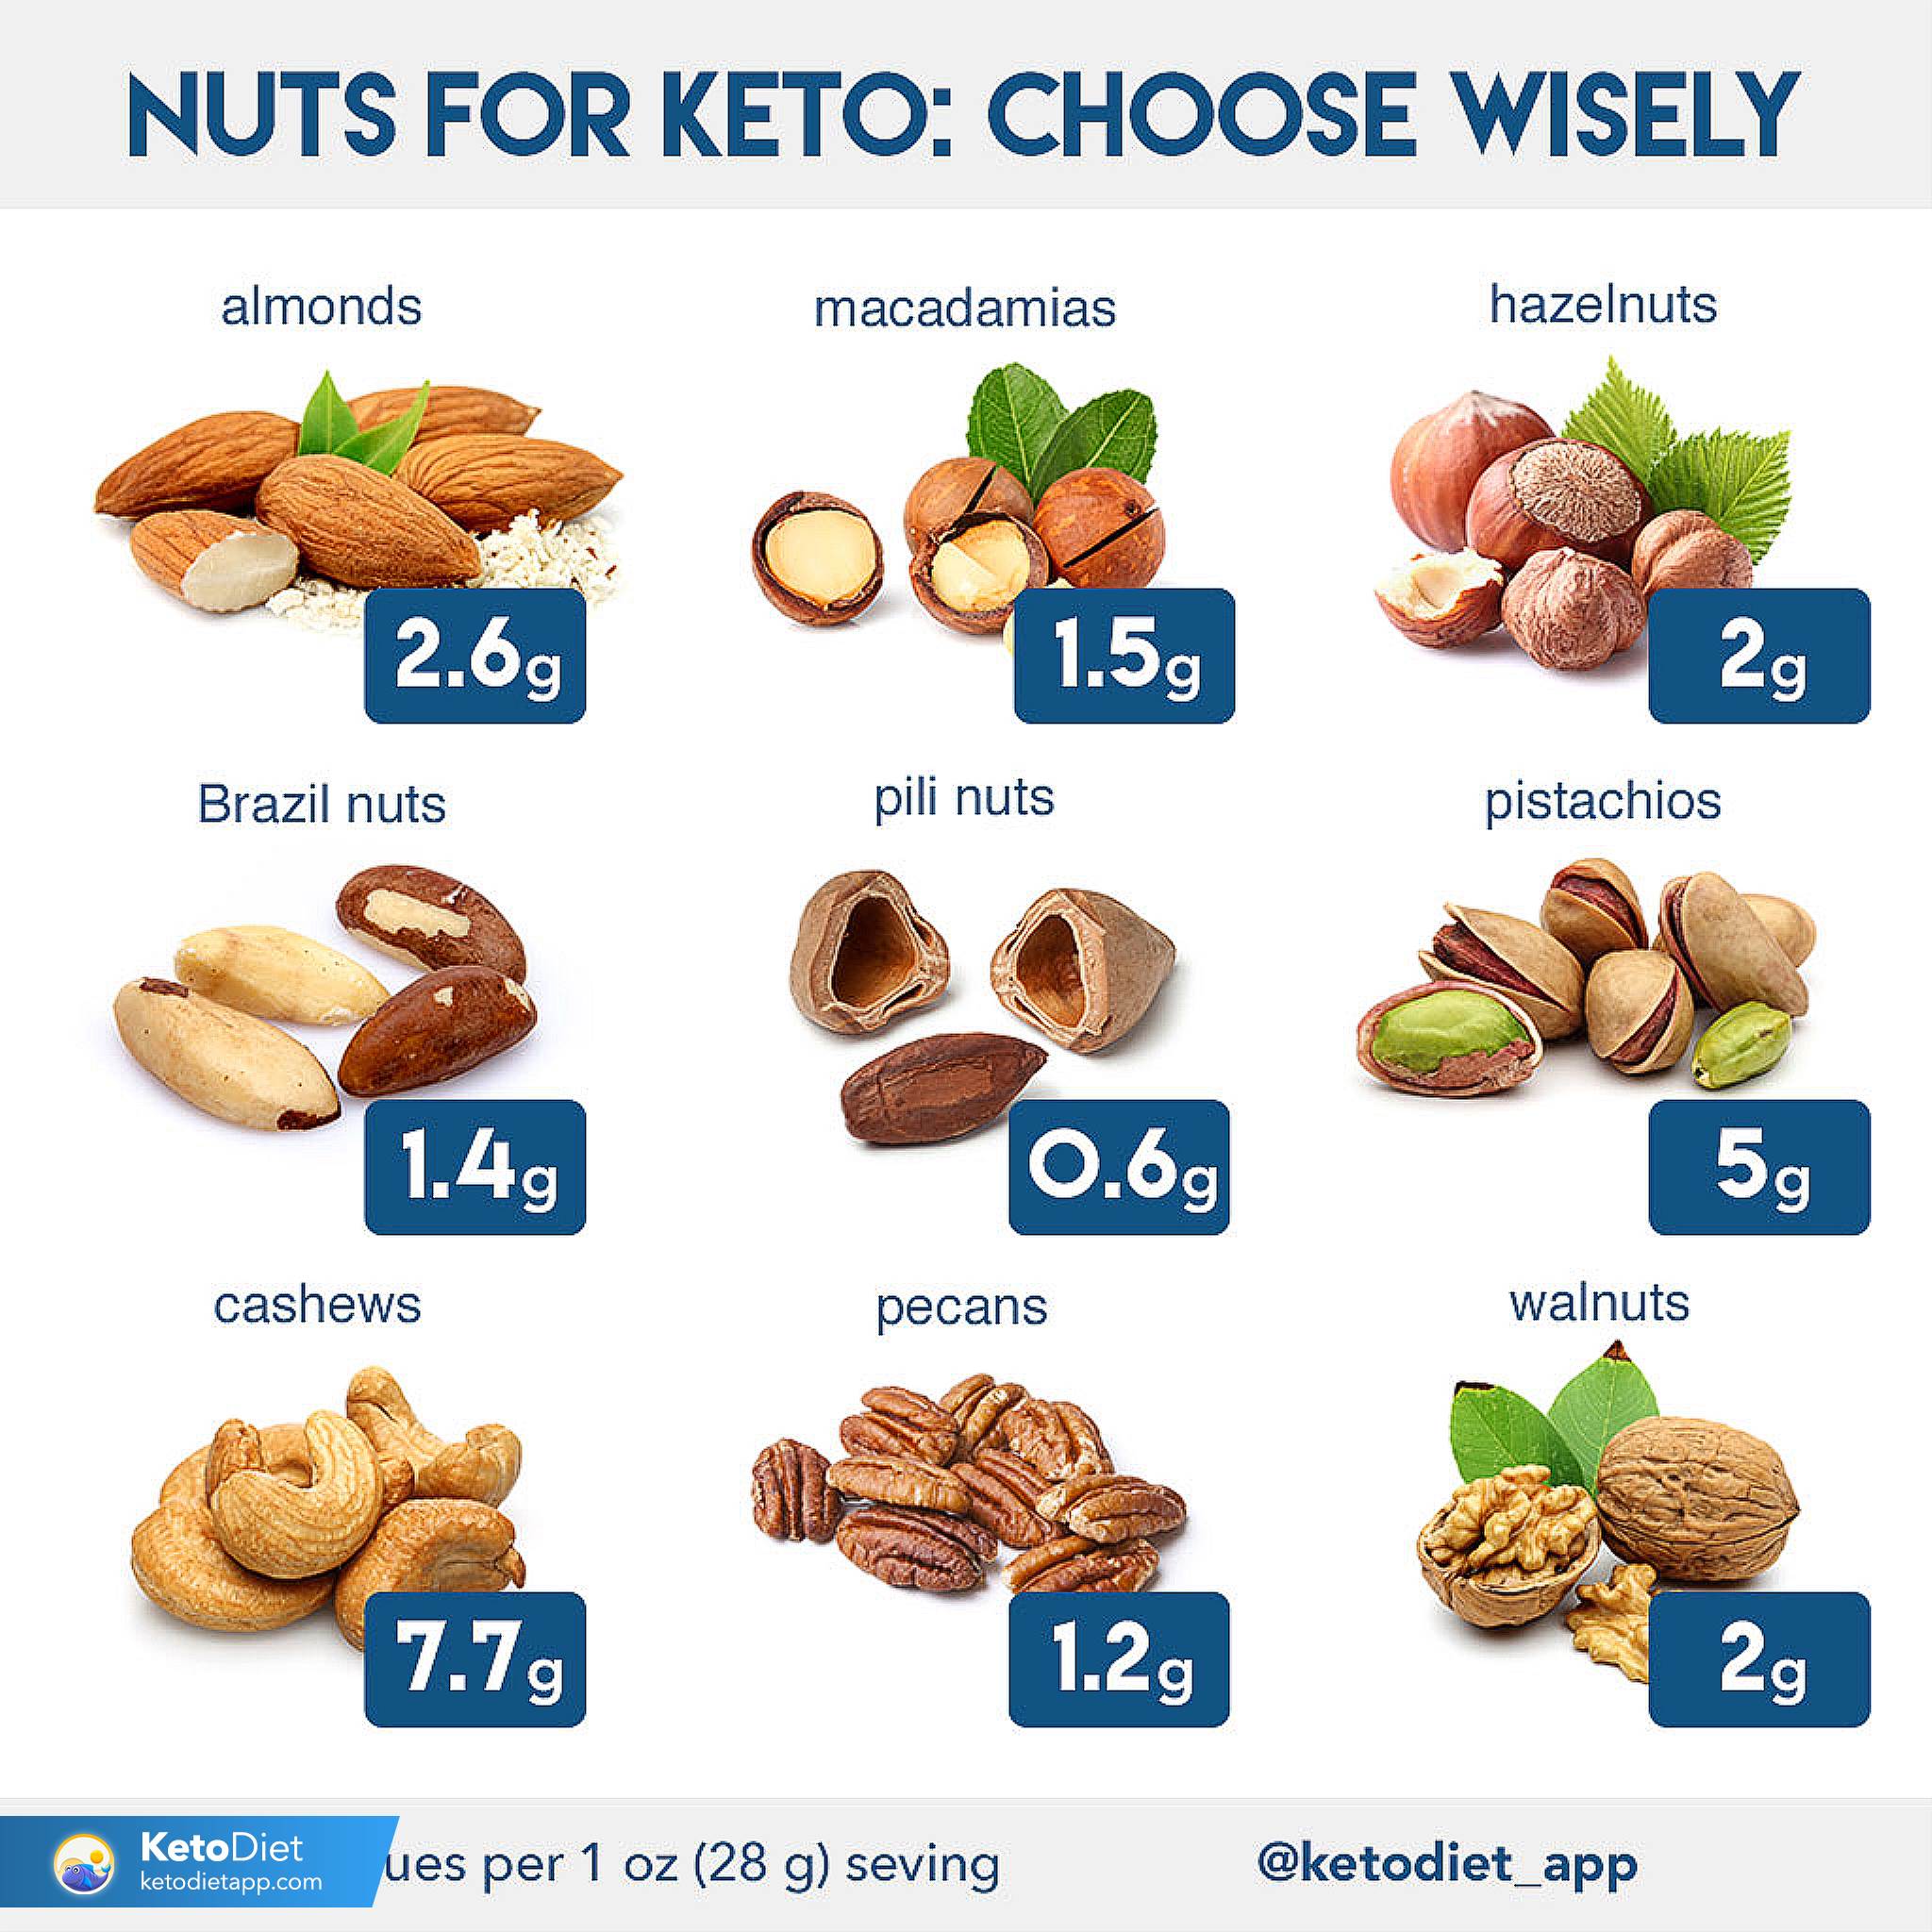 Nuts and Seeds on a Ketogenic Diet